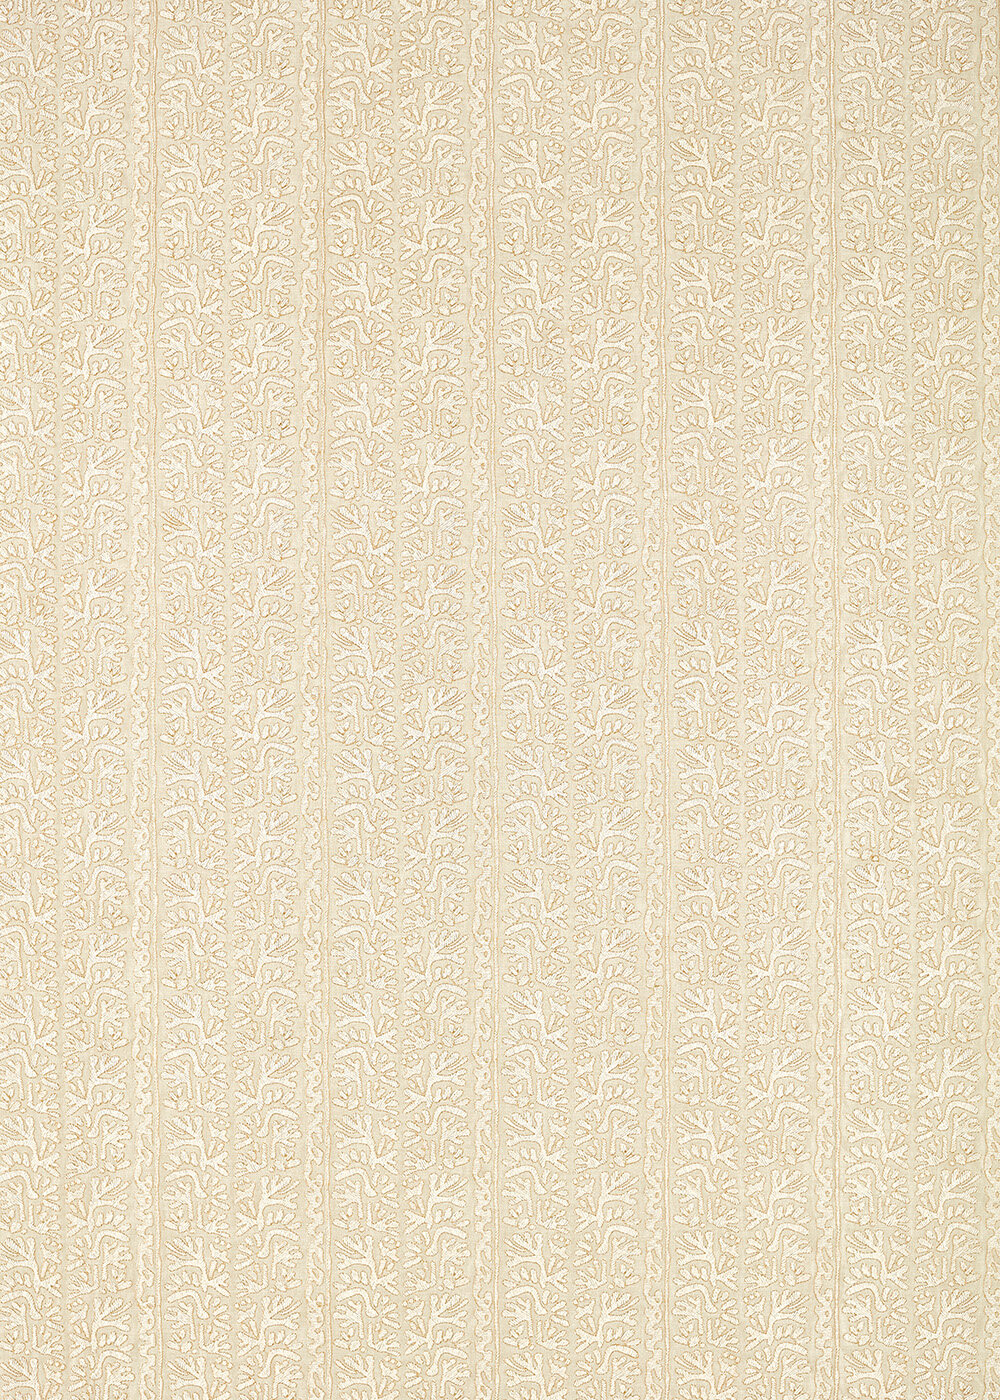 Khorol  Fabric - Almond/ Diffused Light - by Harlequin